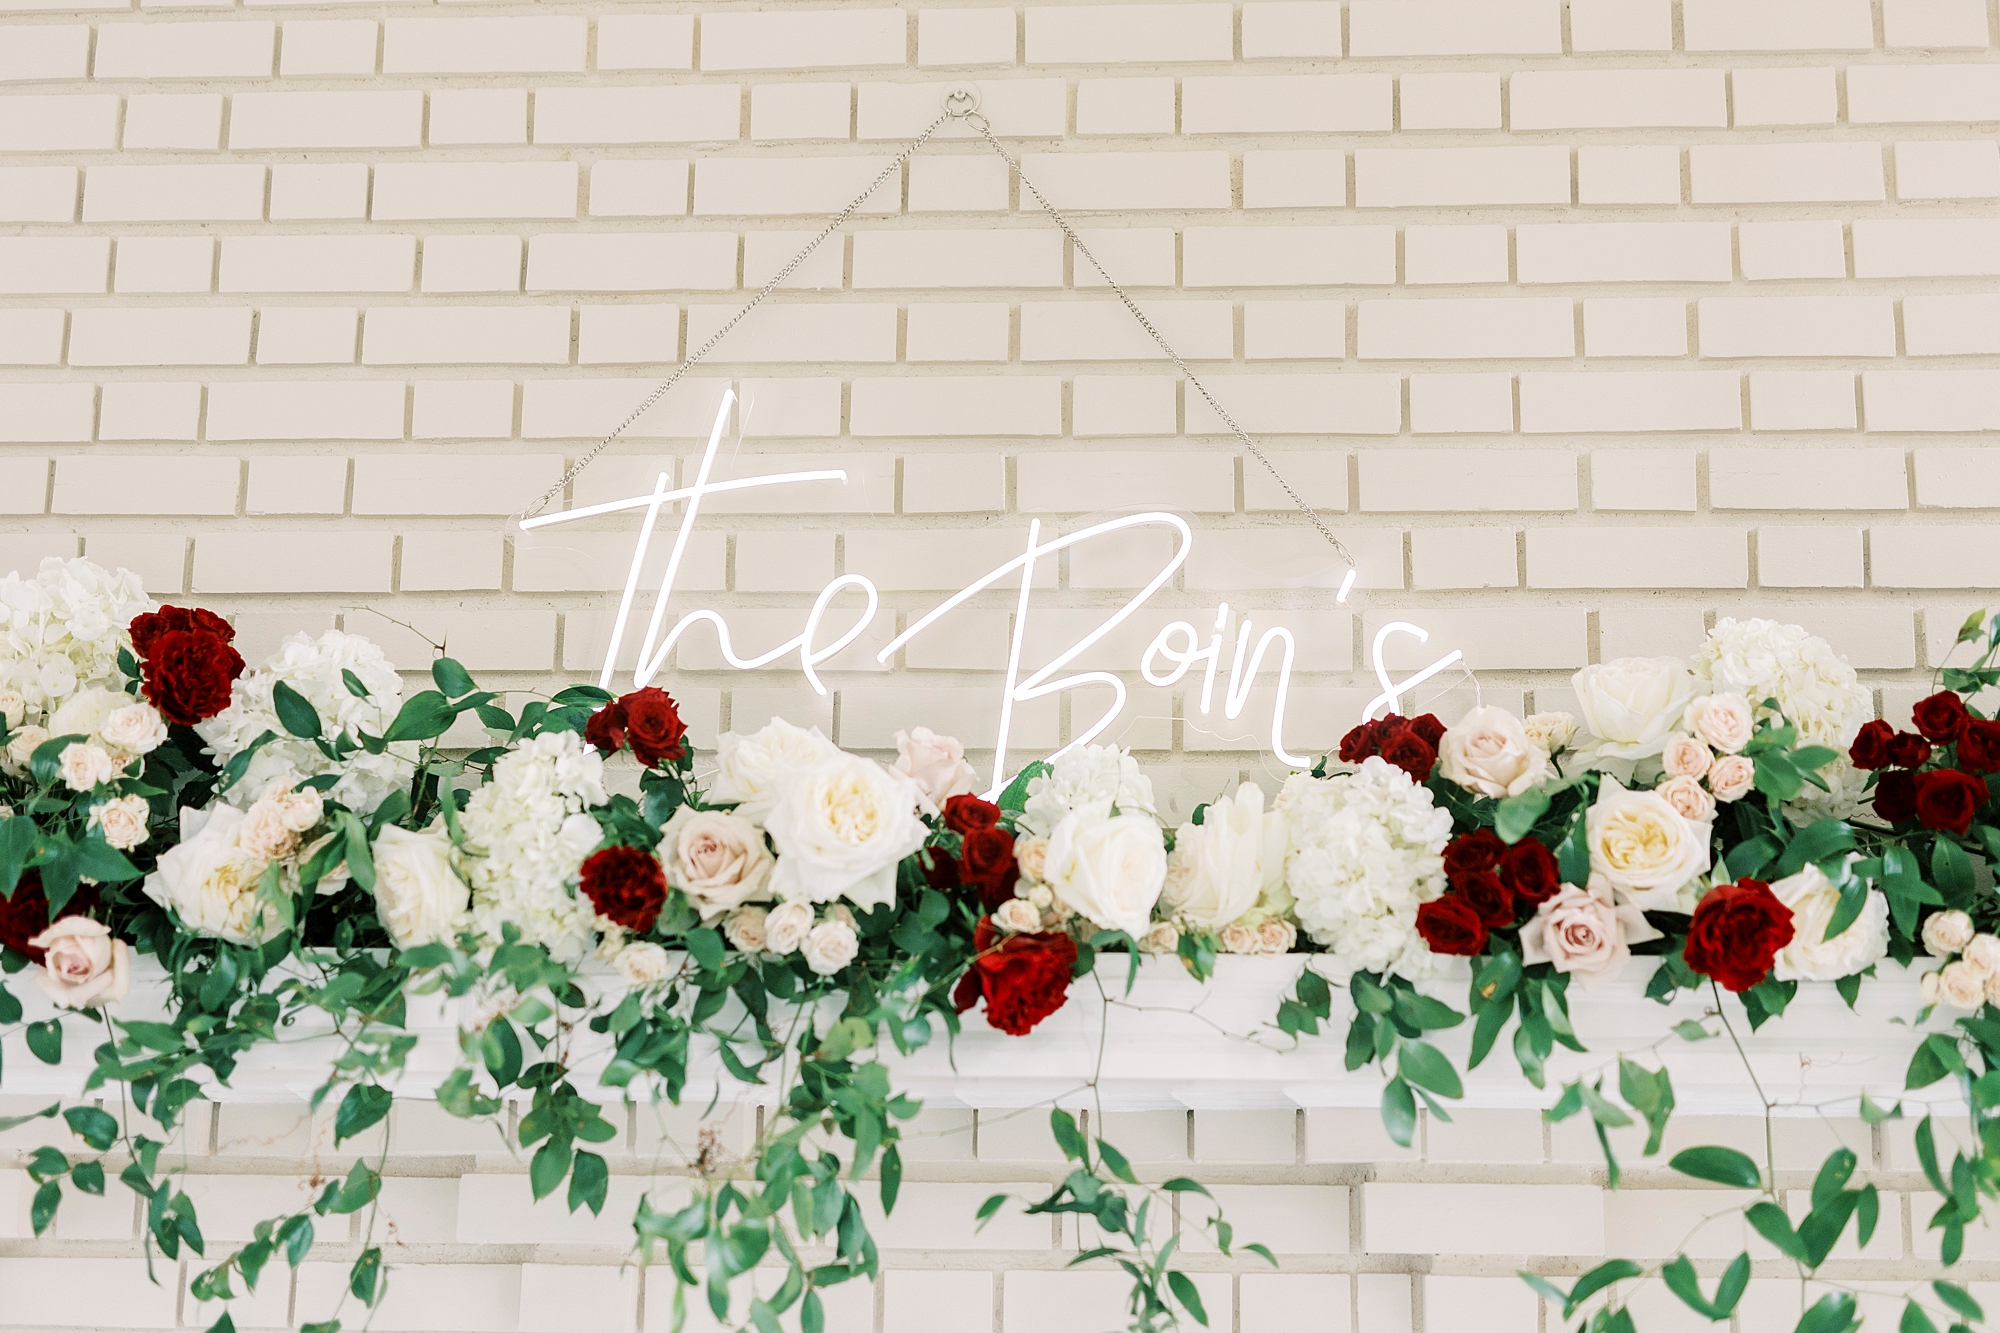 neon sign behind white and red floral display 